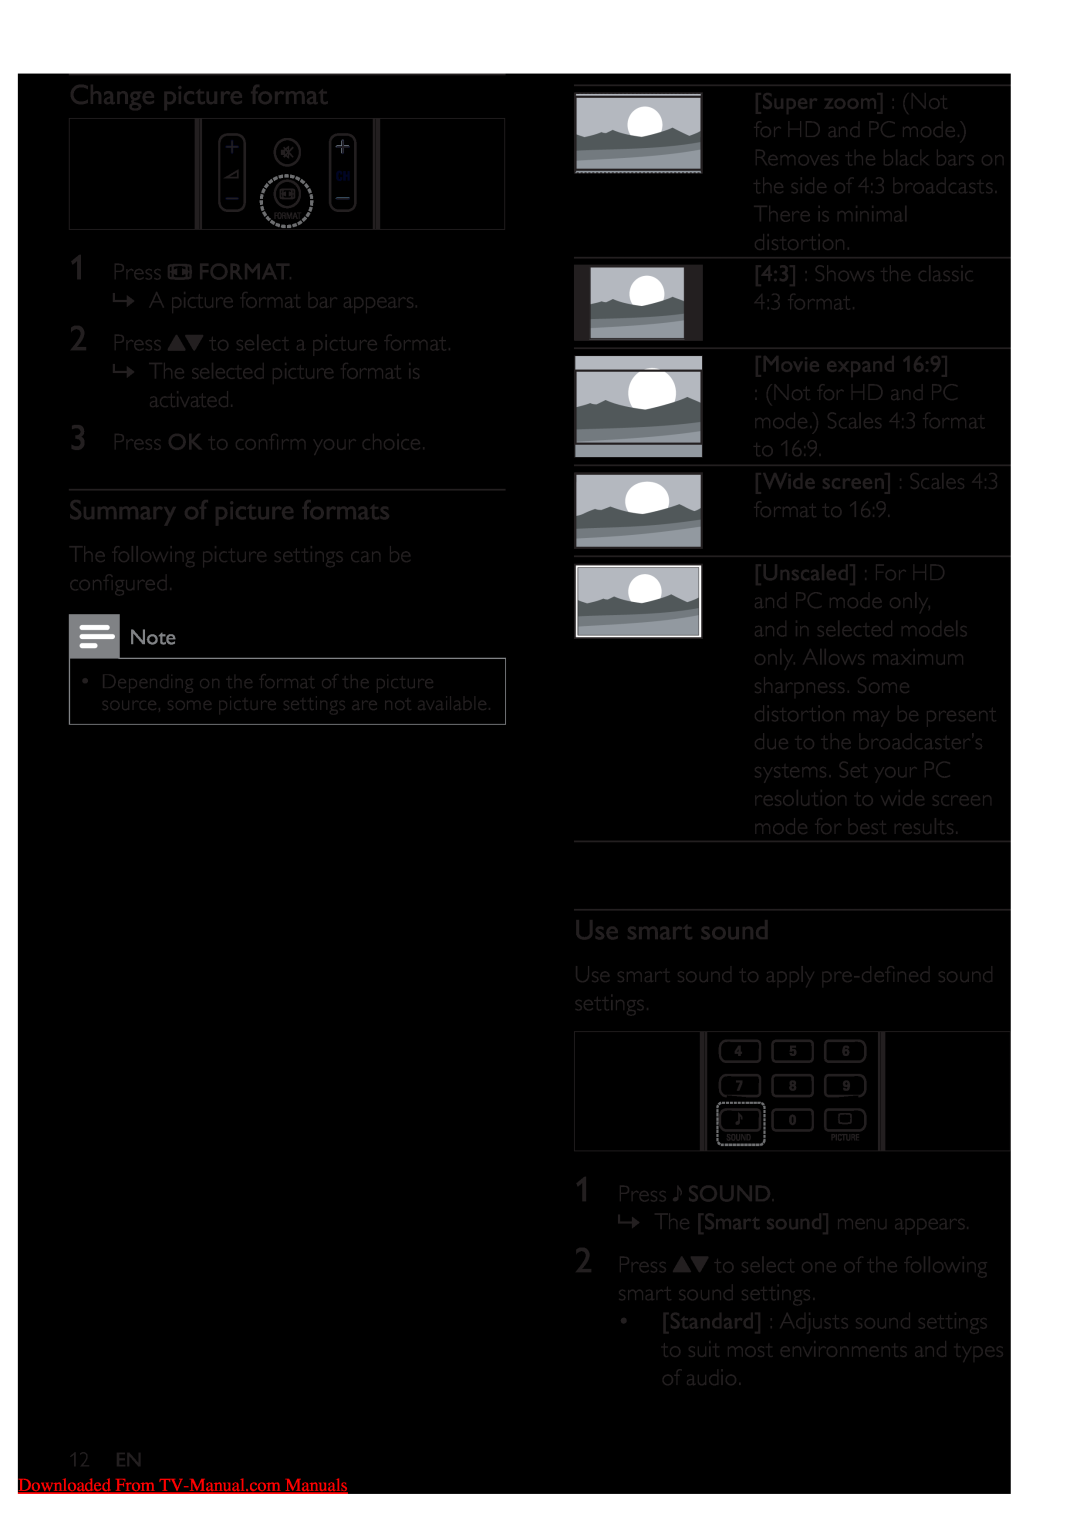 Philips 32PFL5605/98, 40PFL5605S/98, 40PFL5605/98 Change picture format, Summary of picture formats, Use smart sound 